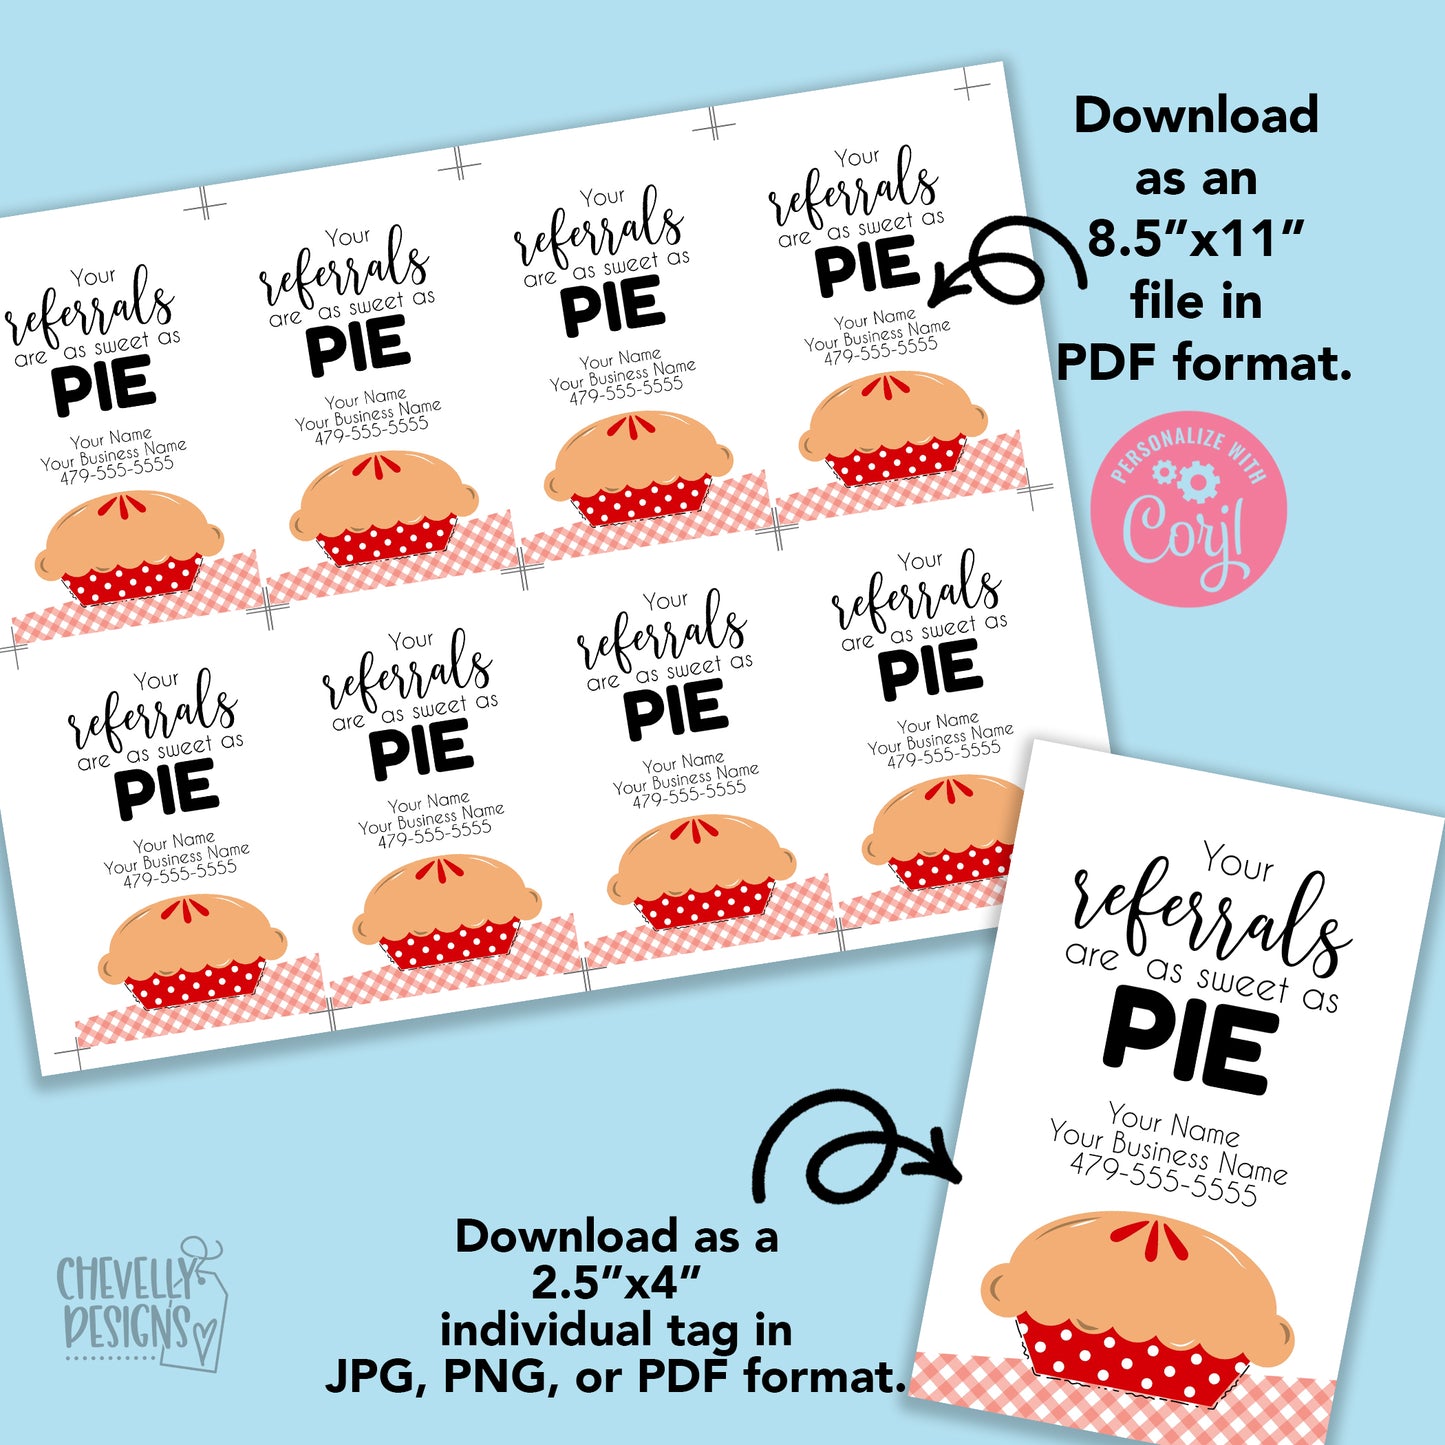 Editable - Your Referrals are as Sweet as Pie Gift Tags - Printable - Digital File